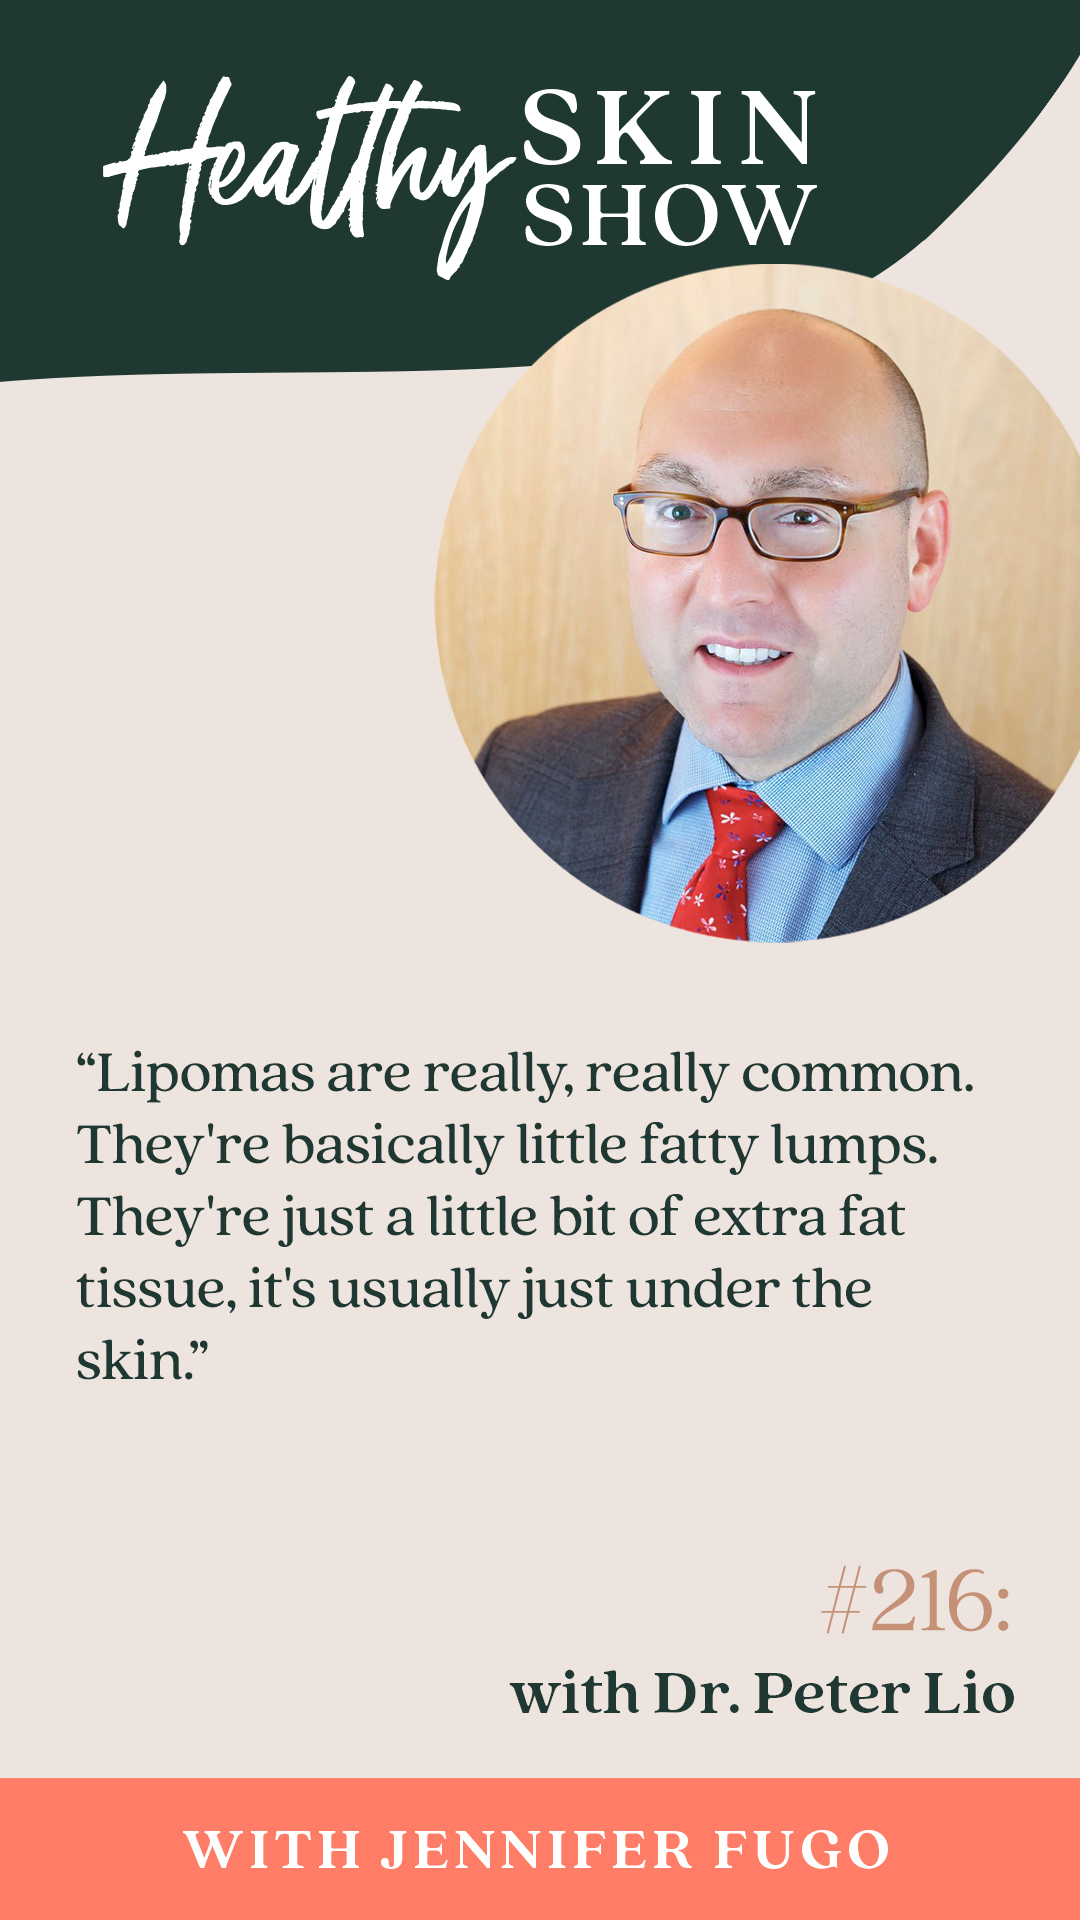 “Lipomas are really, really common. They're basically little fatty lumps. They're just a little bit of extra fat tissue, it's usually just under the skin.”